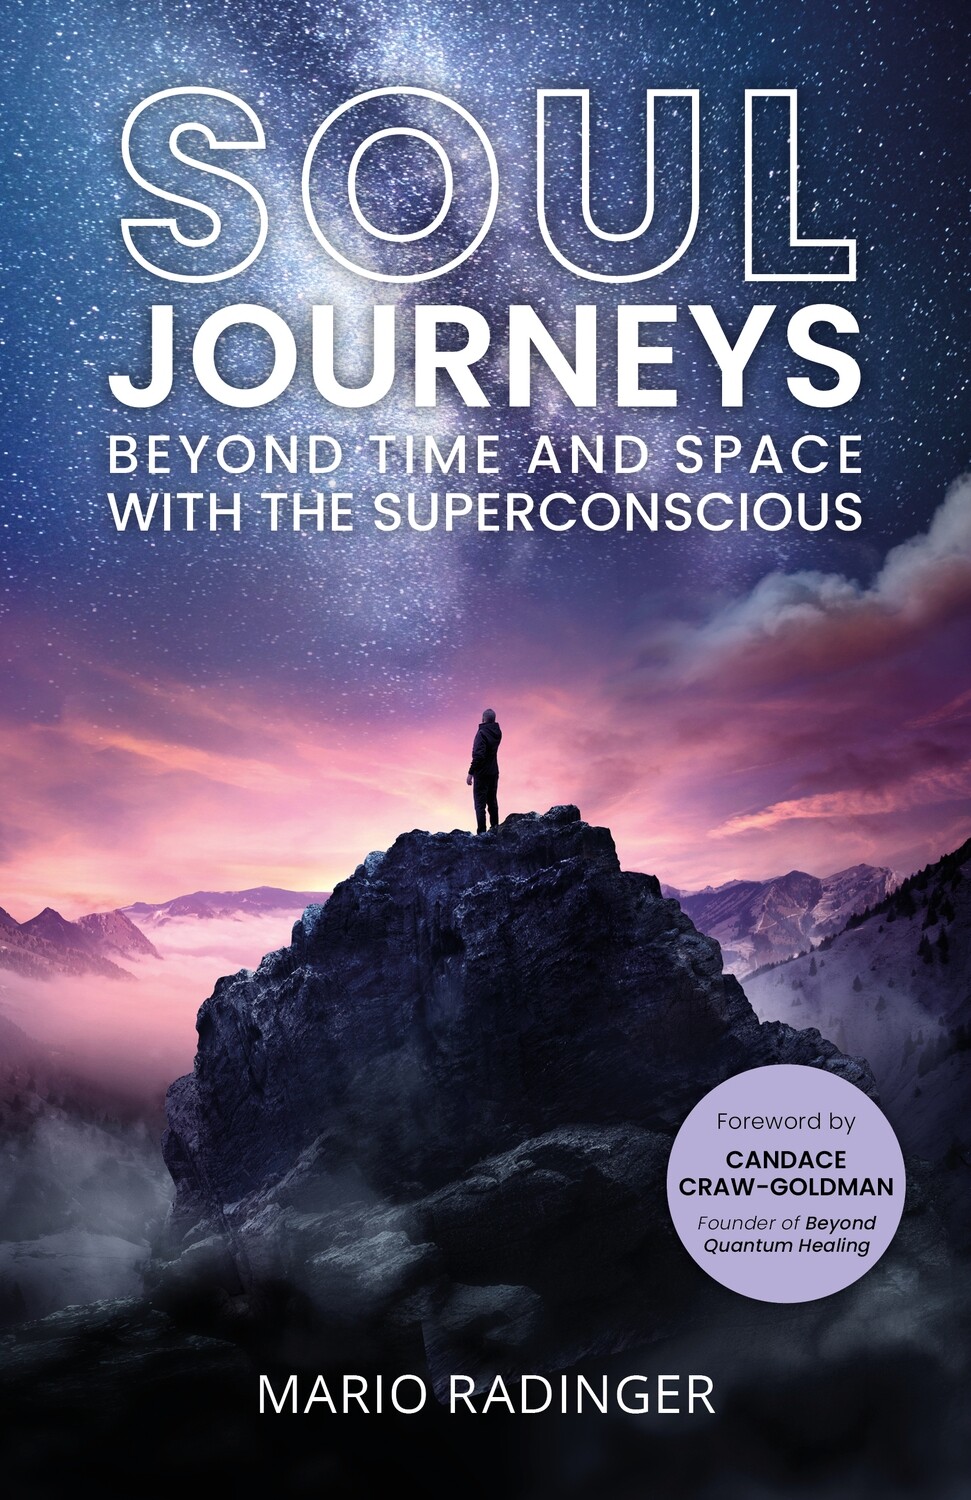 SOUL JOURNEYS (Book 1): Beyond Time and Space with the Superconscious (Paperback)